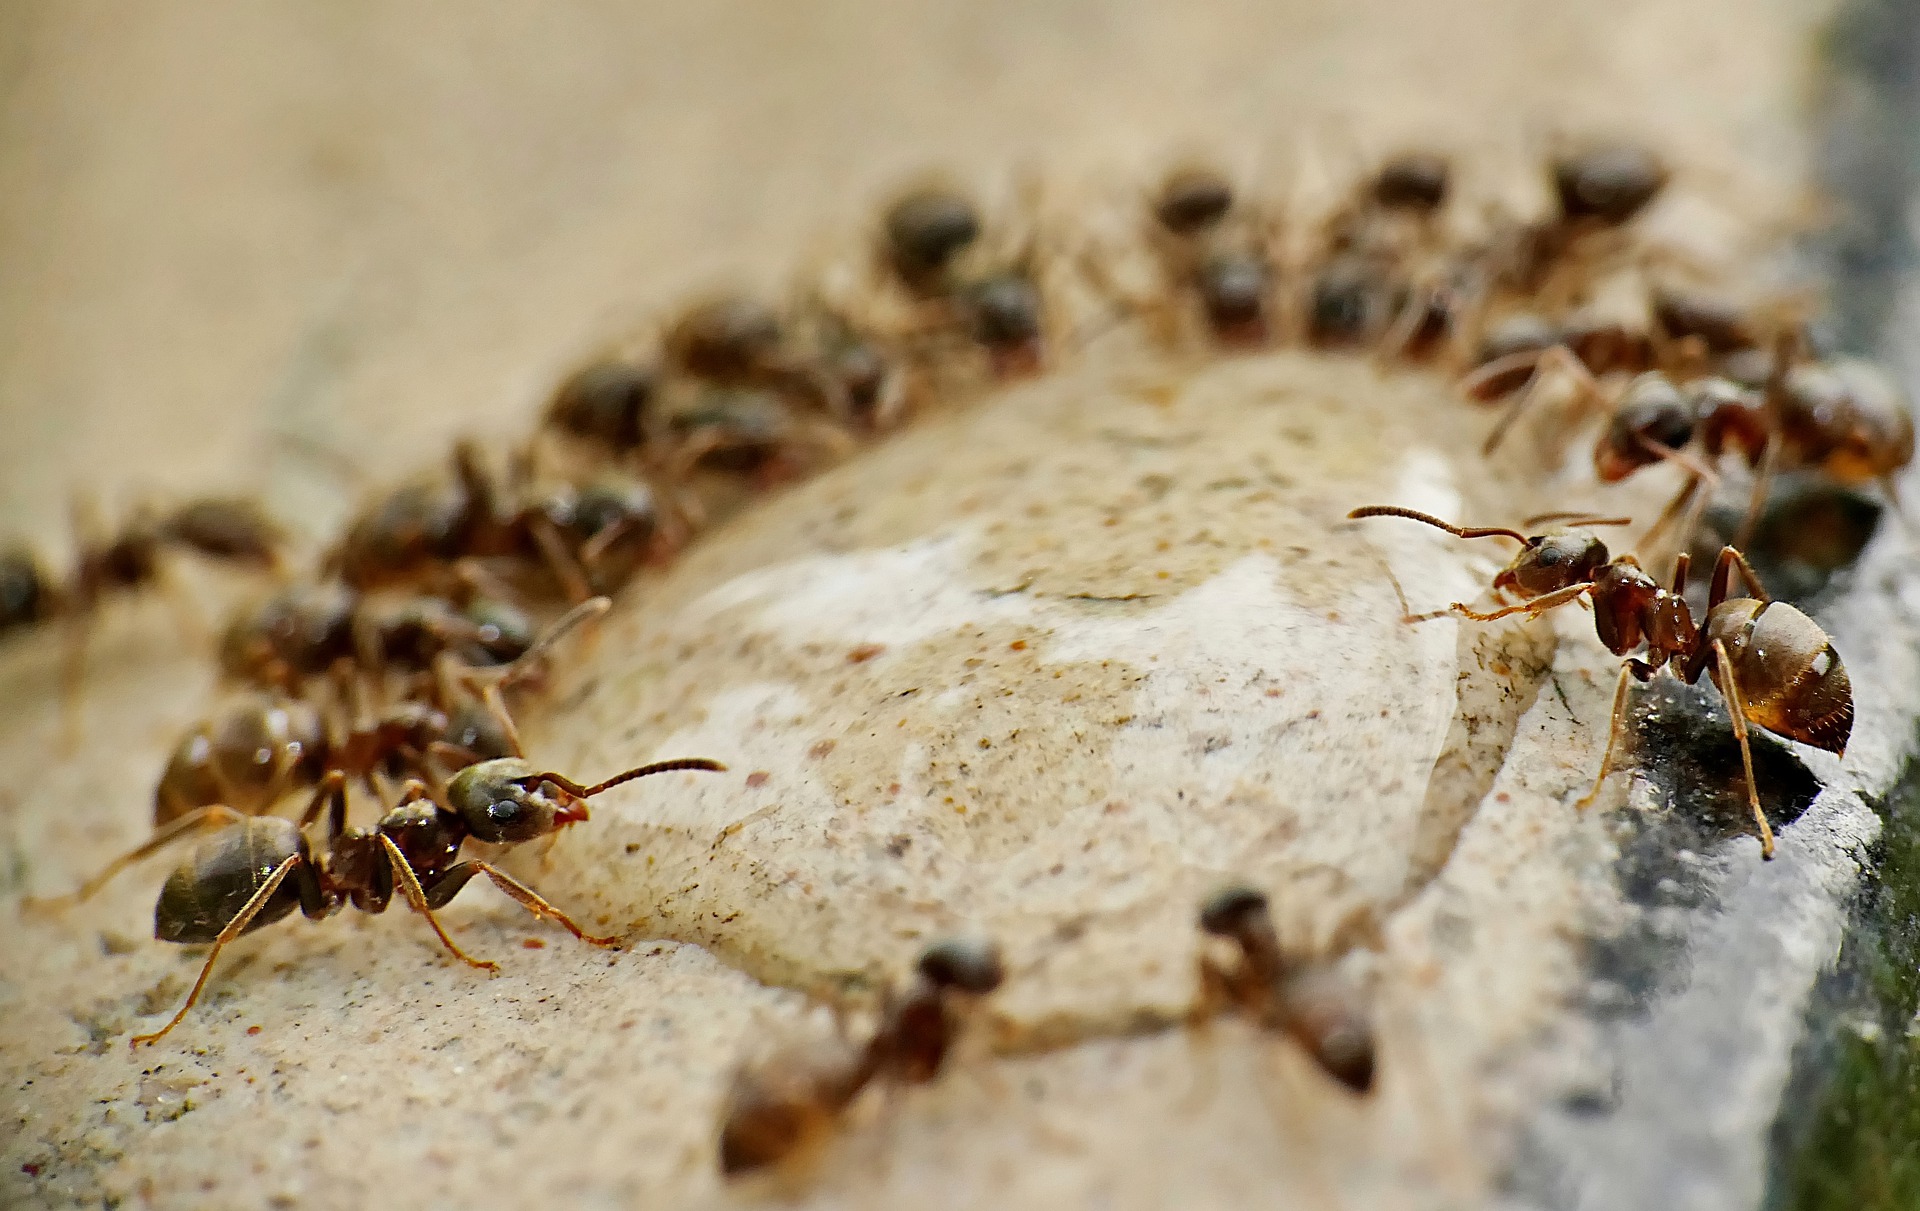 How to Get Rid of Sugar Ants Without Spraying Chemicals